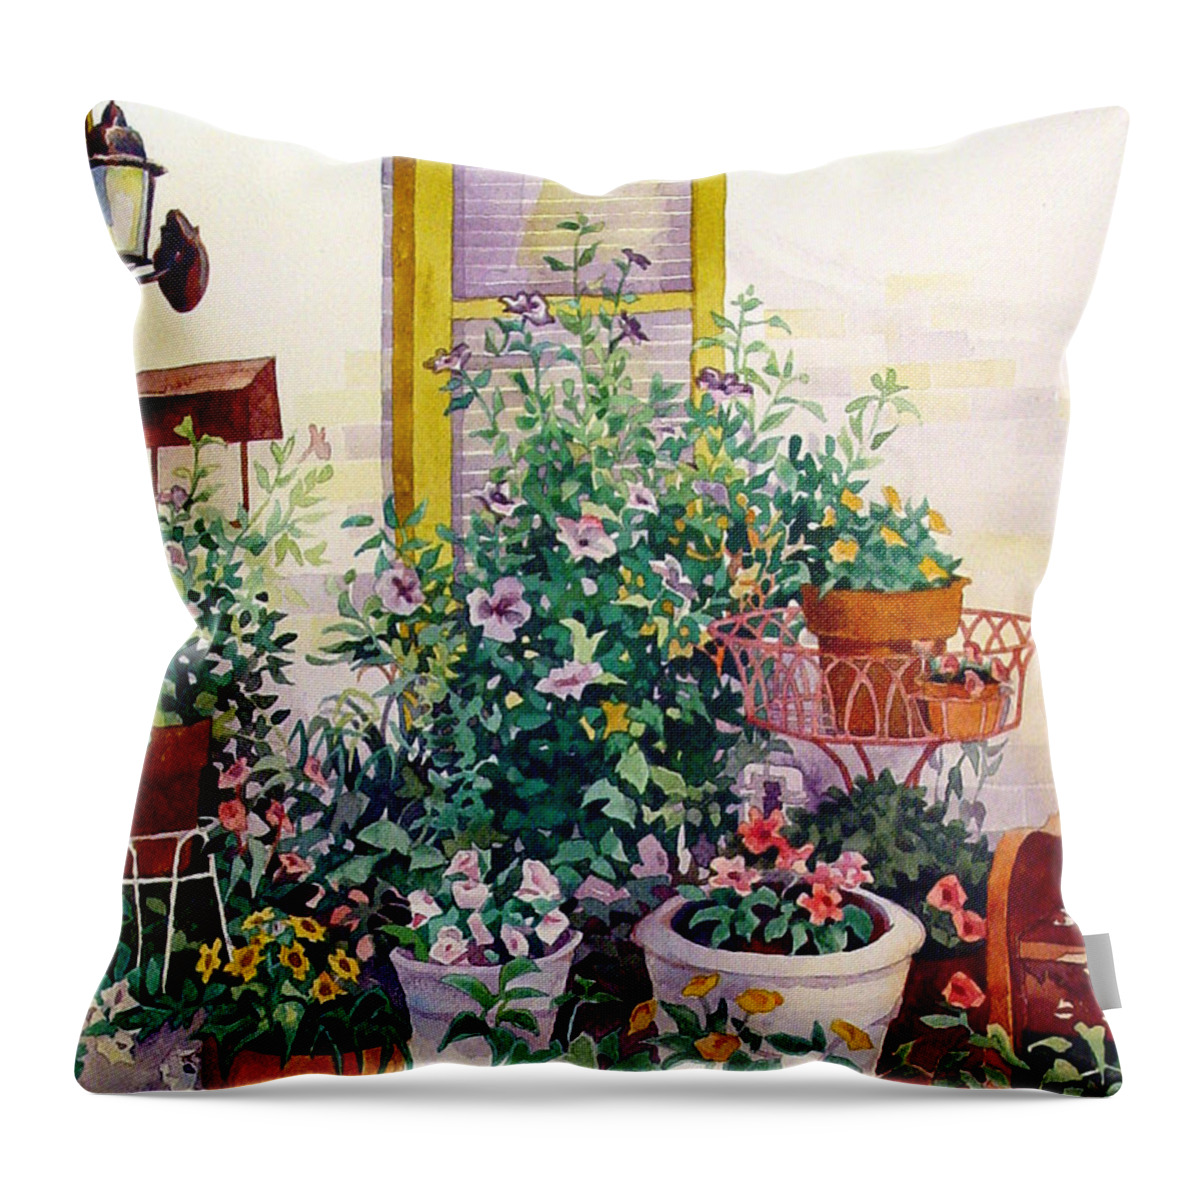 #watercolor #watercolorpainting #landscape #cityscape #frederickmd #artinfrederick #artist #garden #urbangarden Throw Pillow featuring the painting Urban Garden by Mick Williams